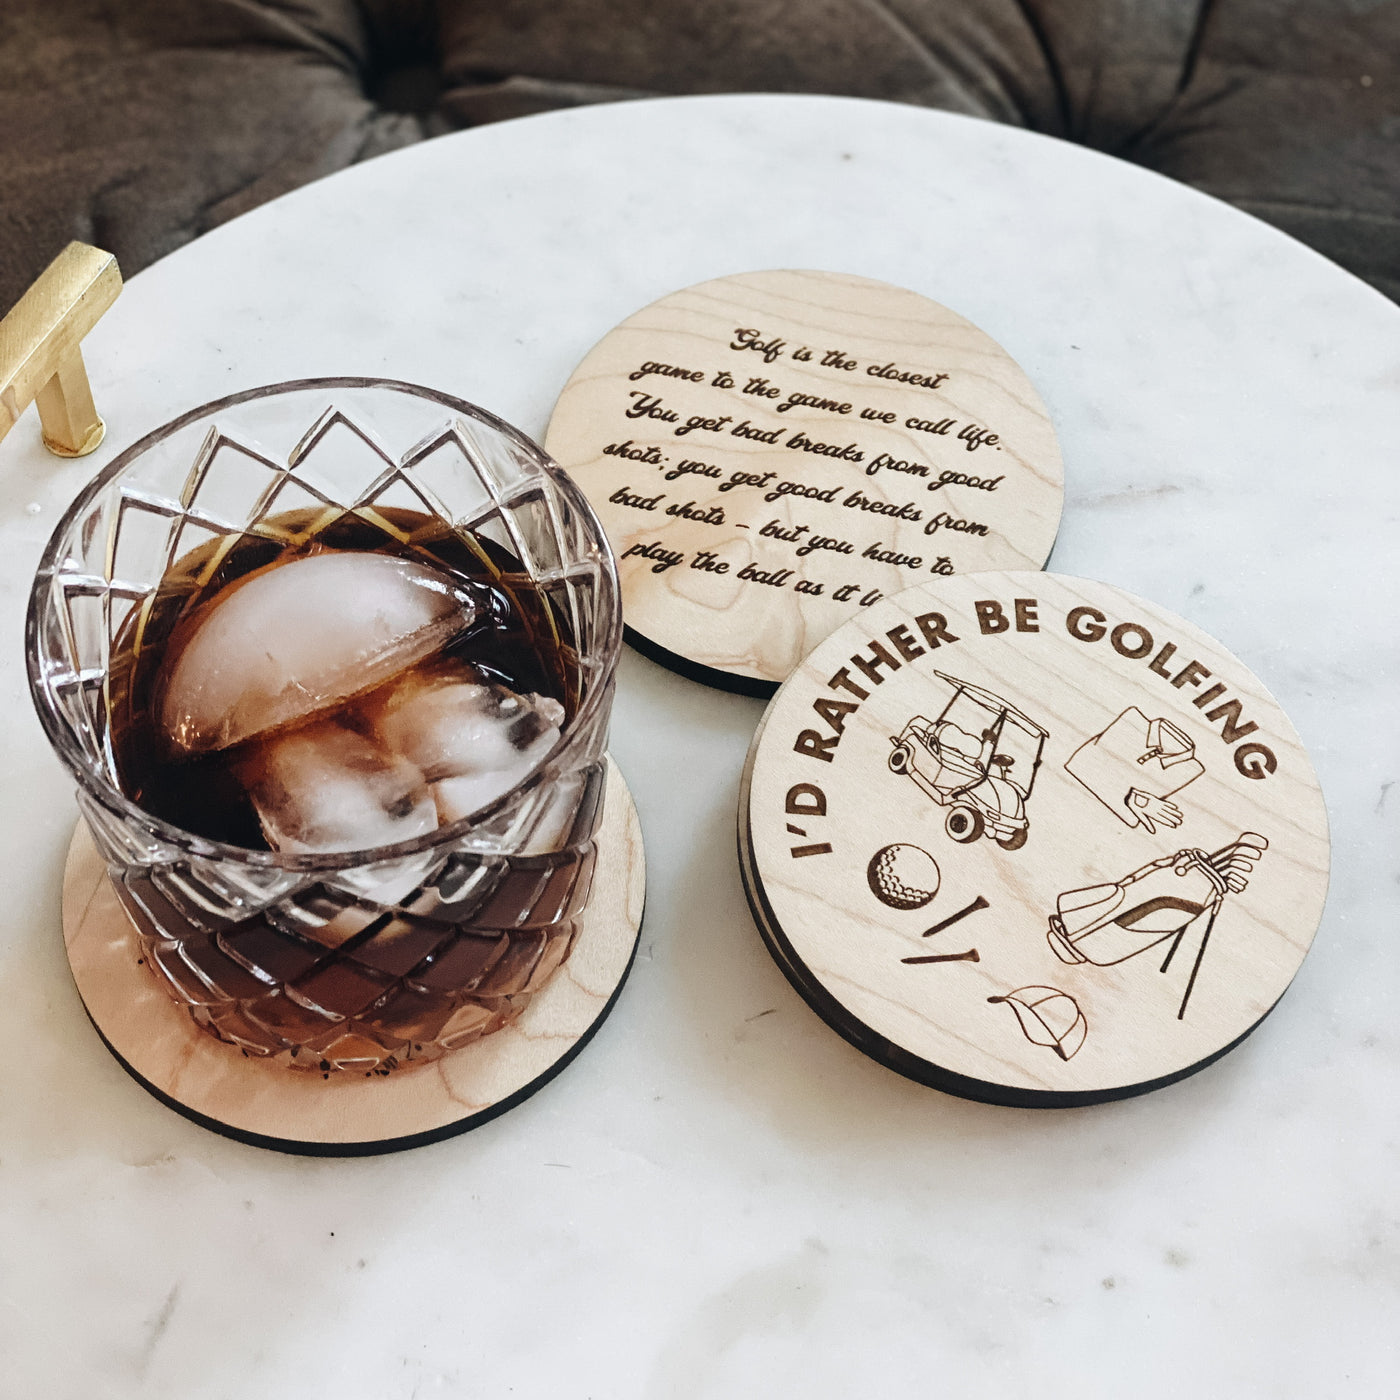 I'd Rather Be Golfing Coasters + Golf Quote Coasters